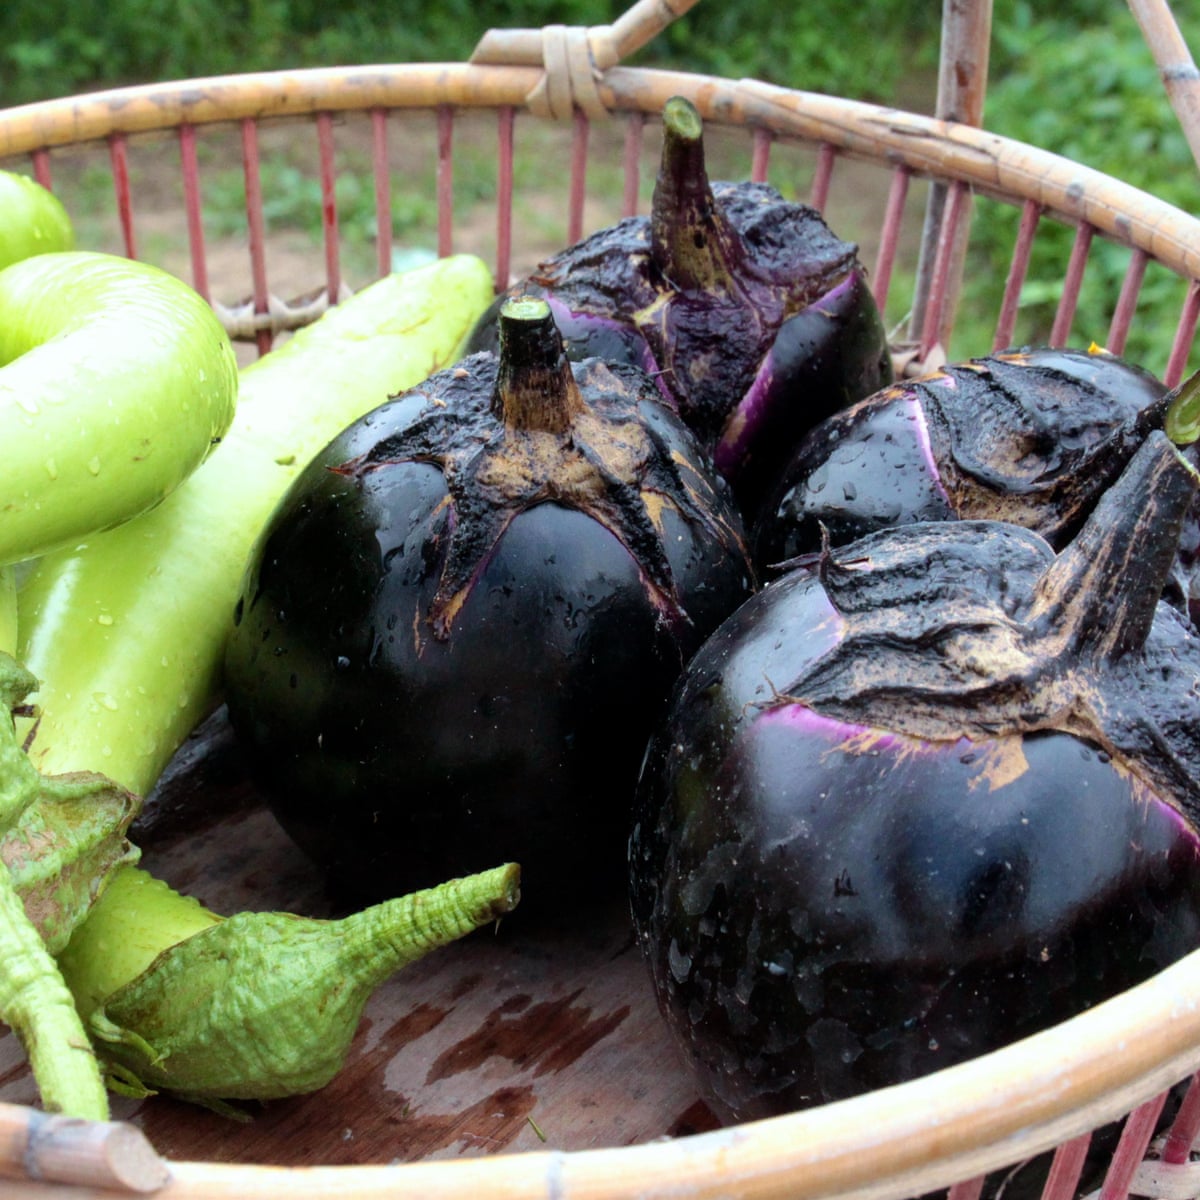 Tender And Luscious No Other Eggplant Compares To This Vegetables The Guardian